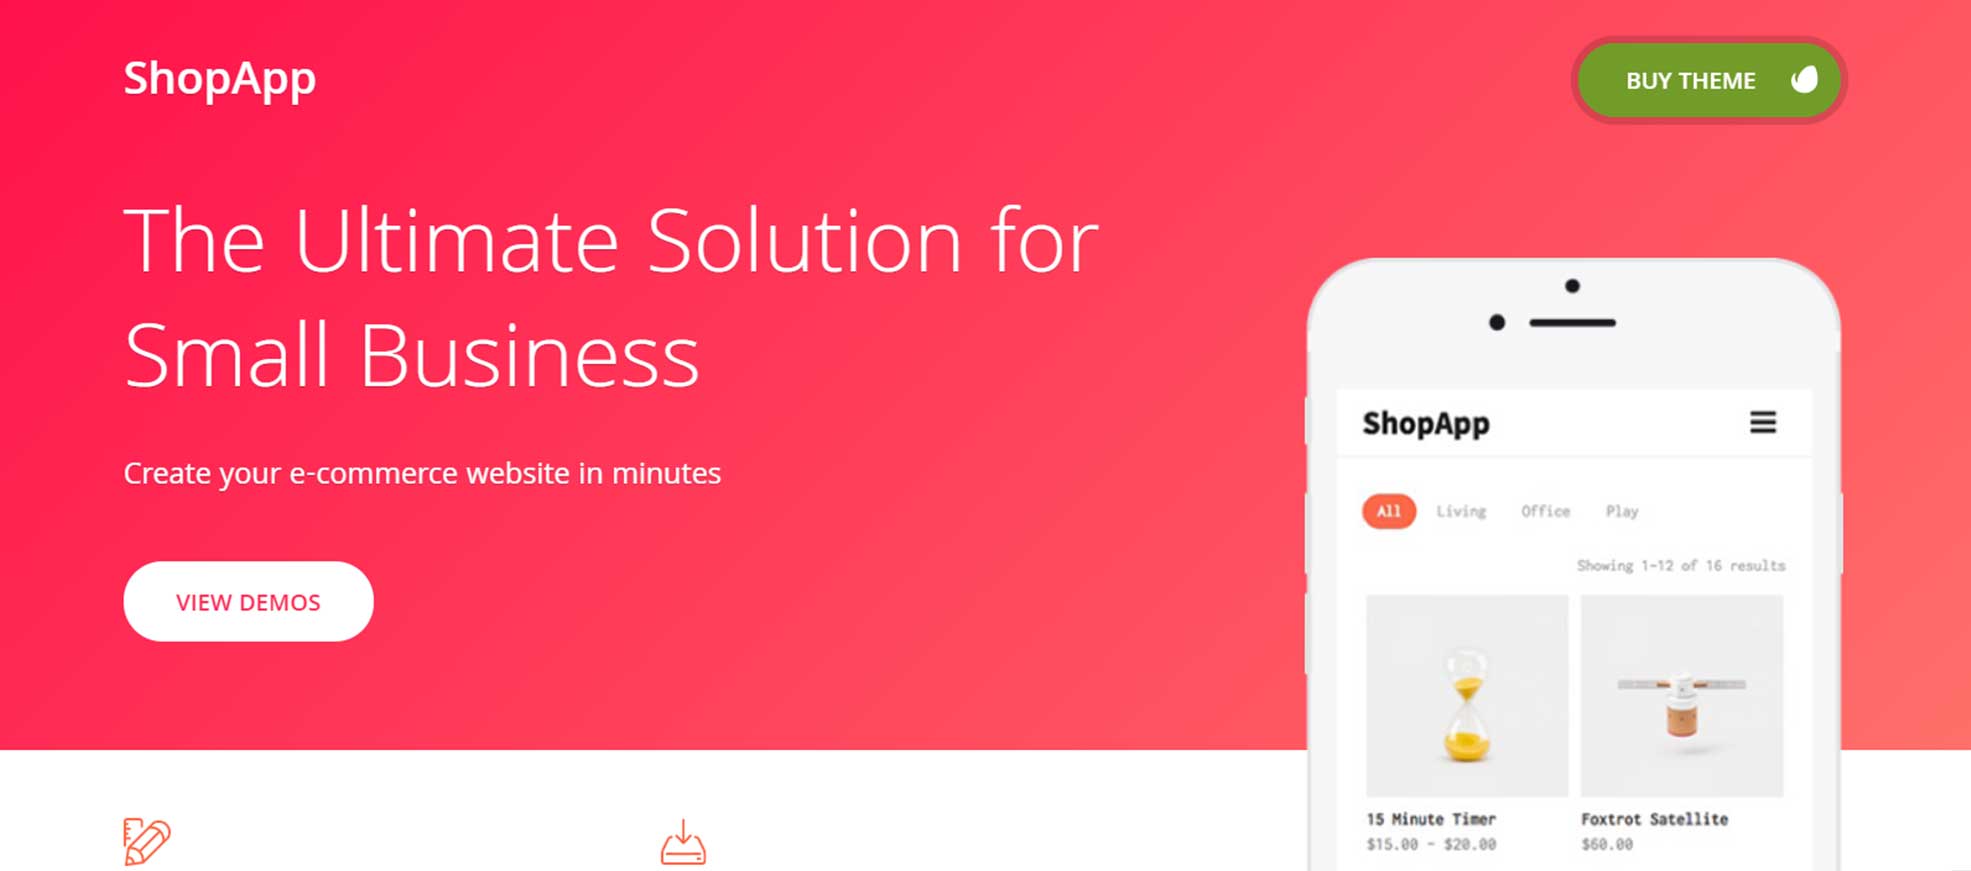 ShopApp - WordPress Theme for Small Business